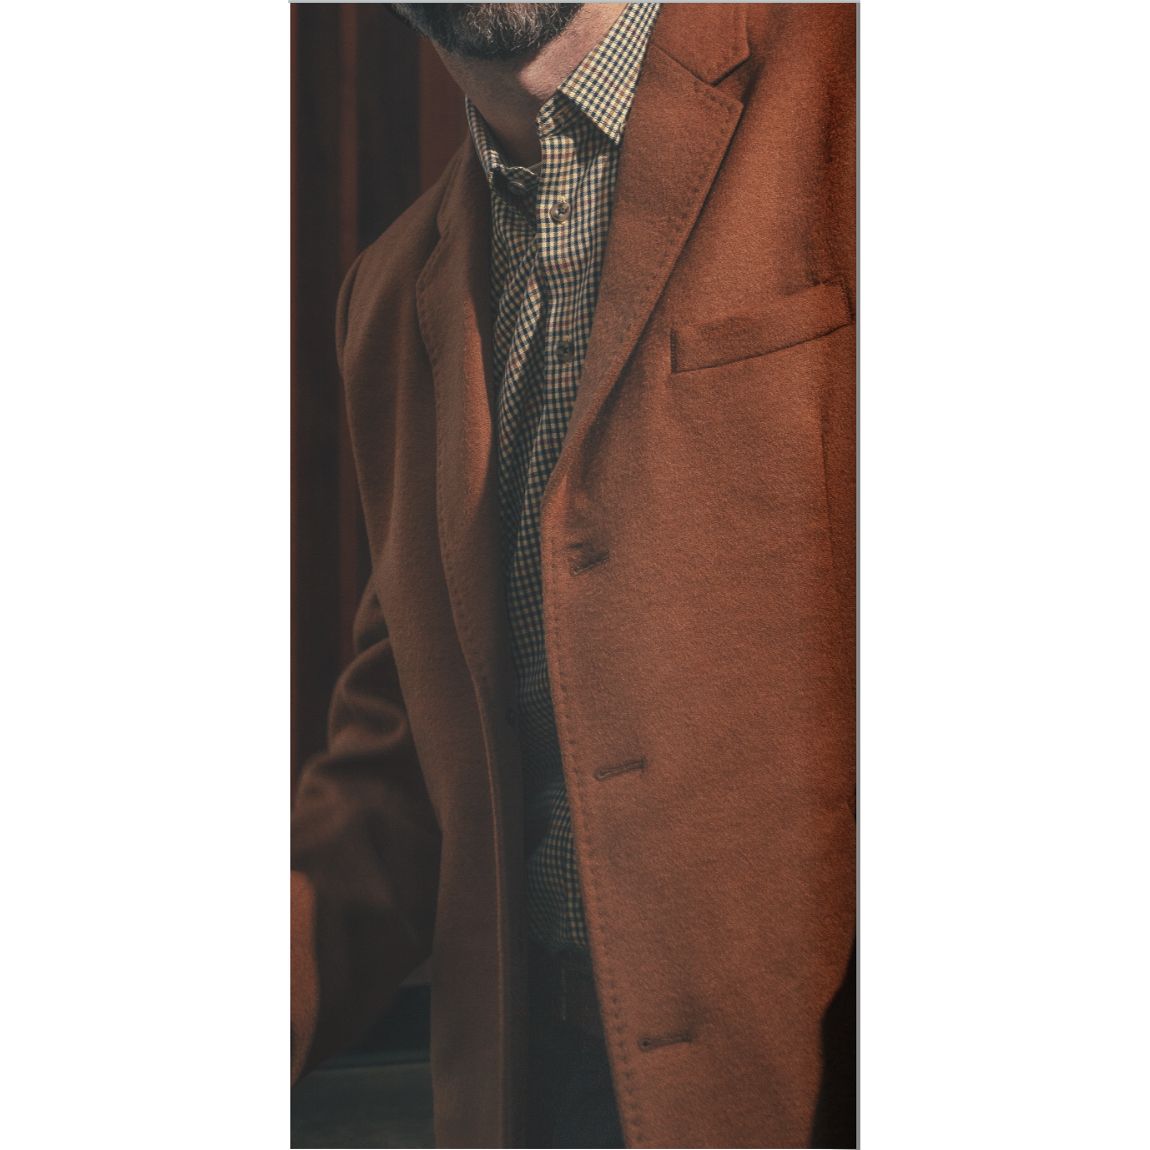 Wool Blend 3 Button Coat in Camel by Viyella